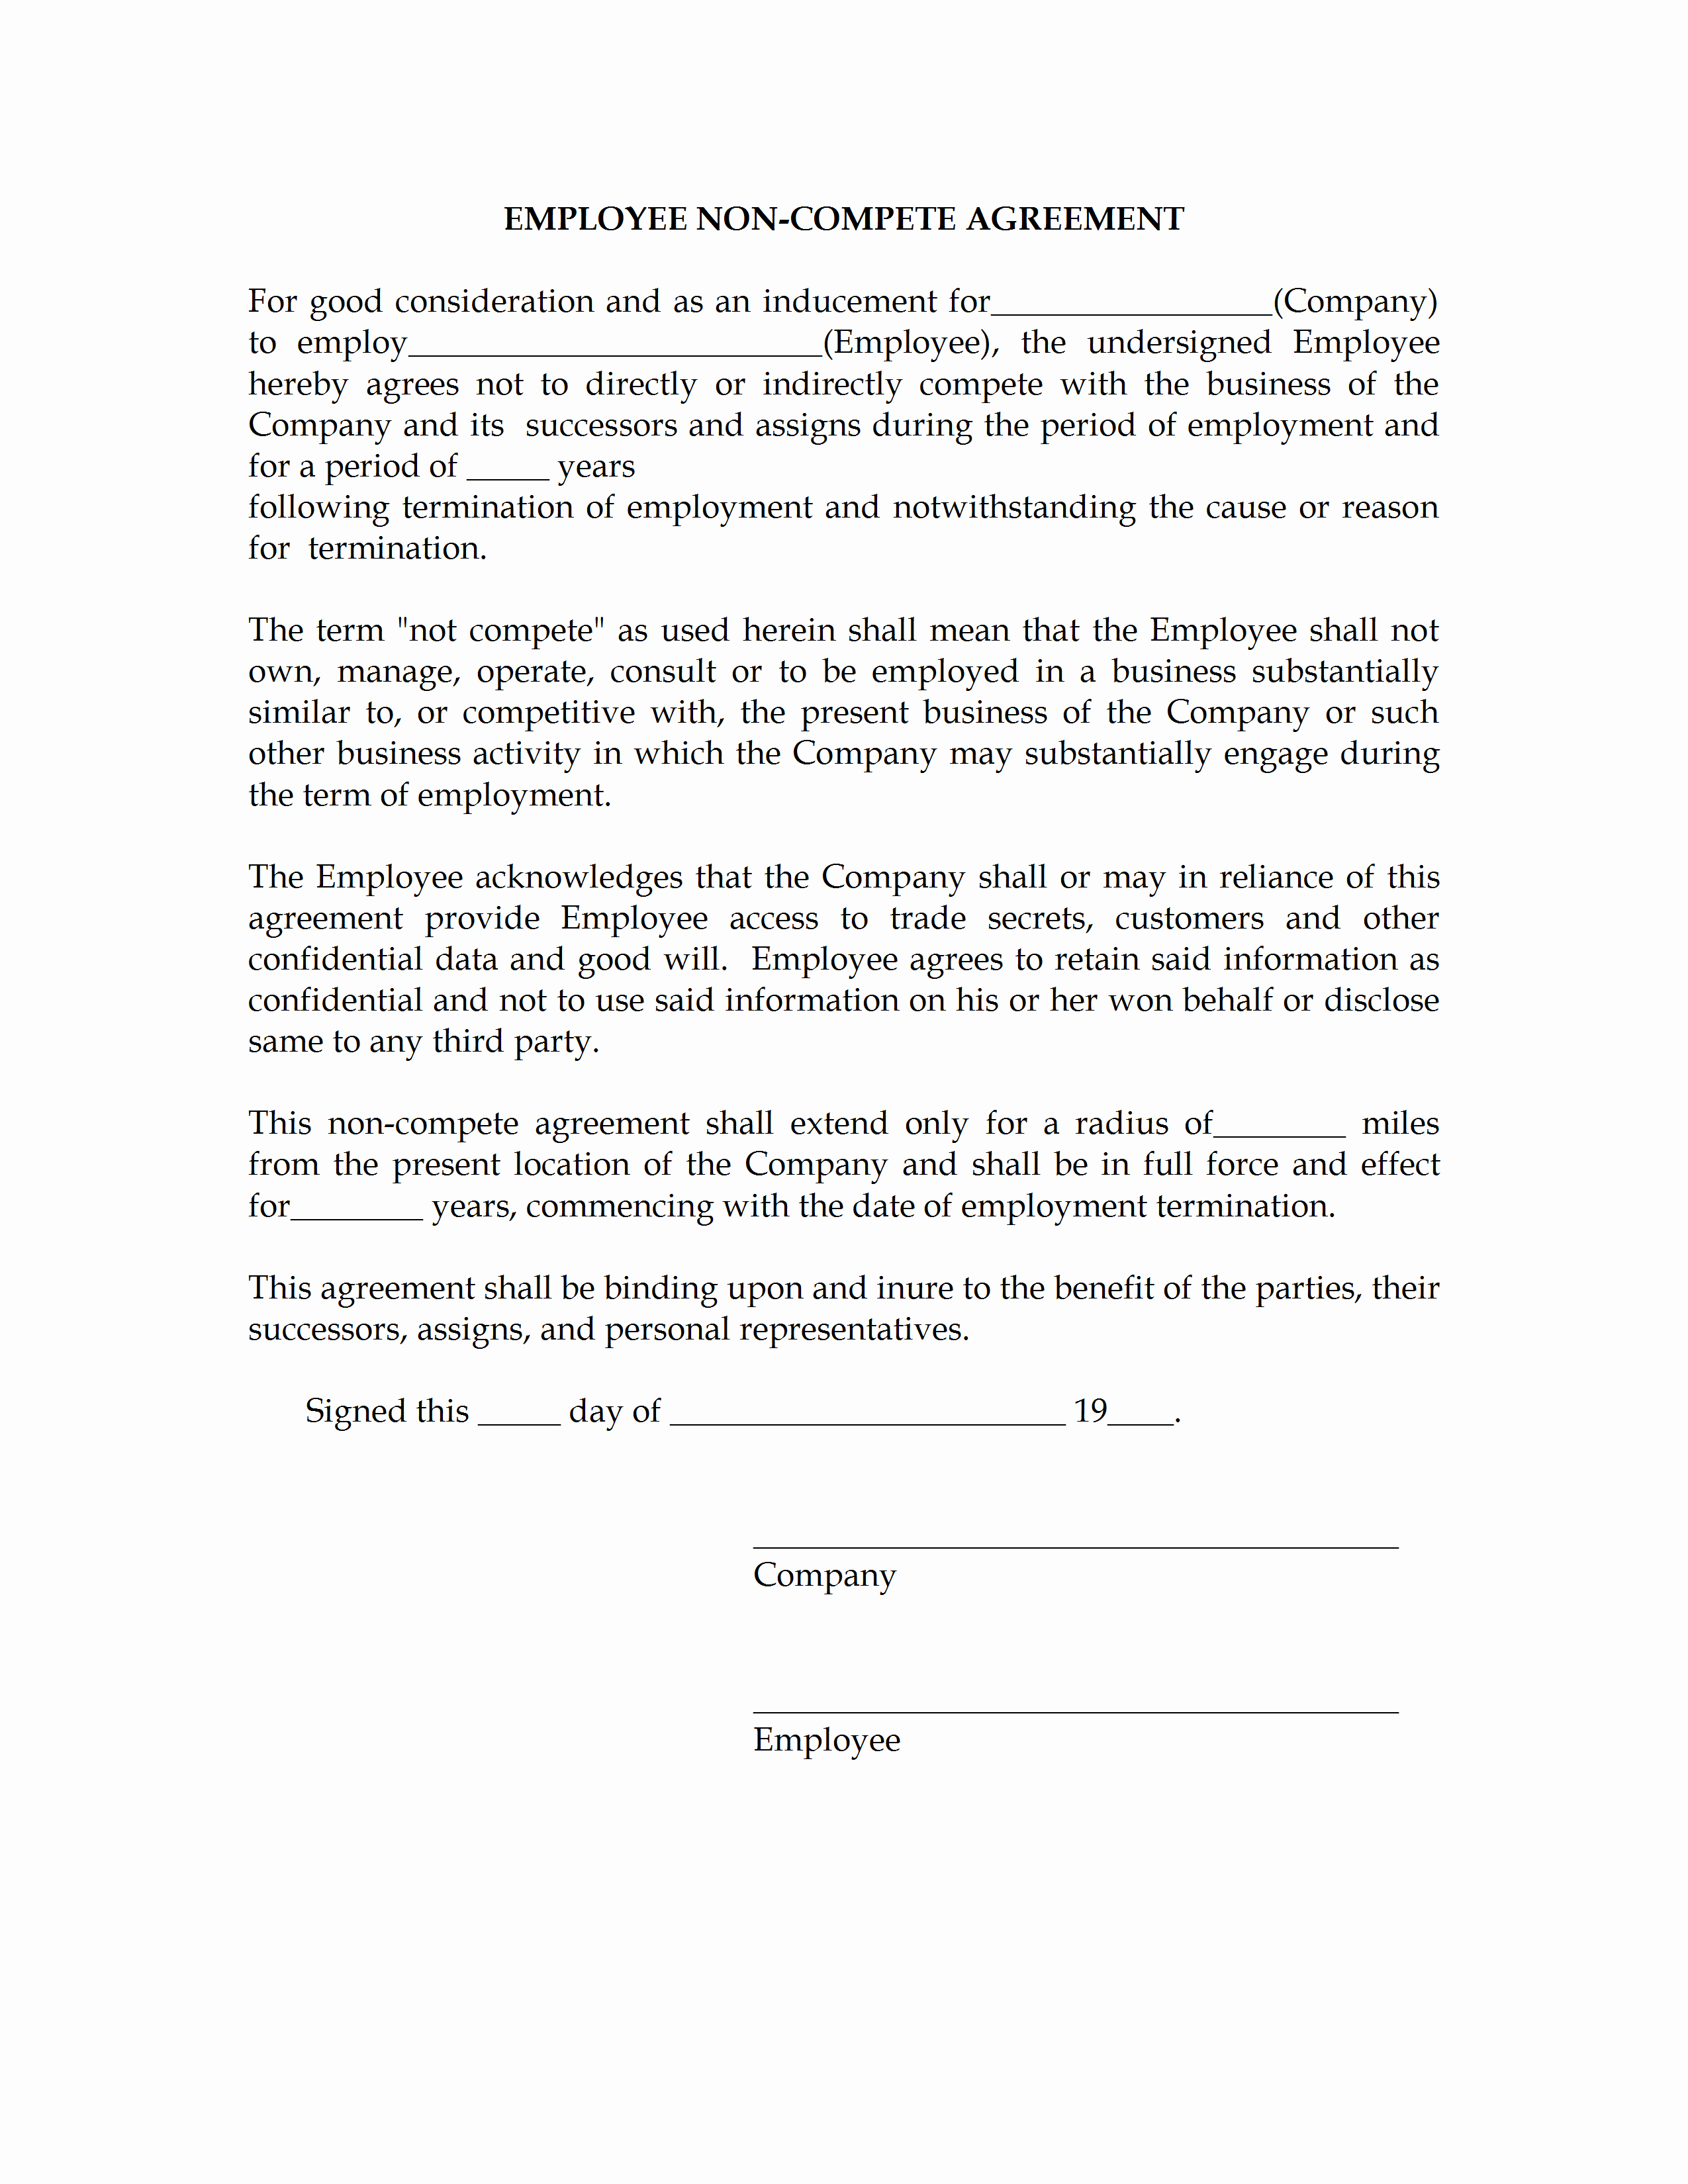 Non Compete Agreement Sample Pdf Awesome Non Pete Agreement Tempalte